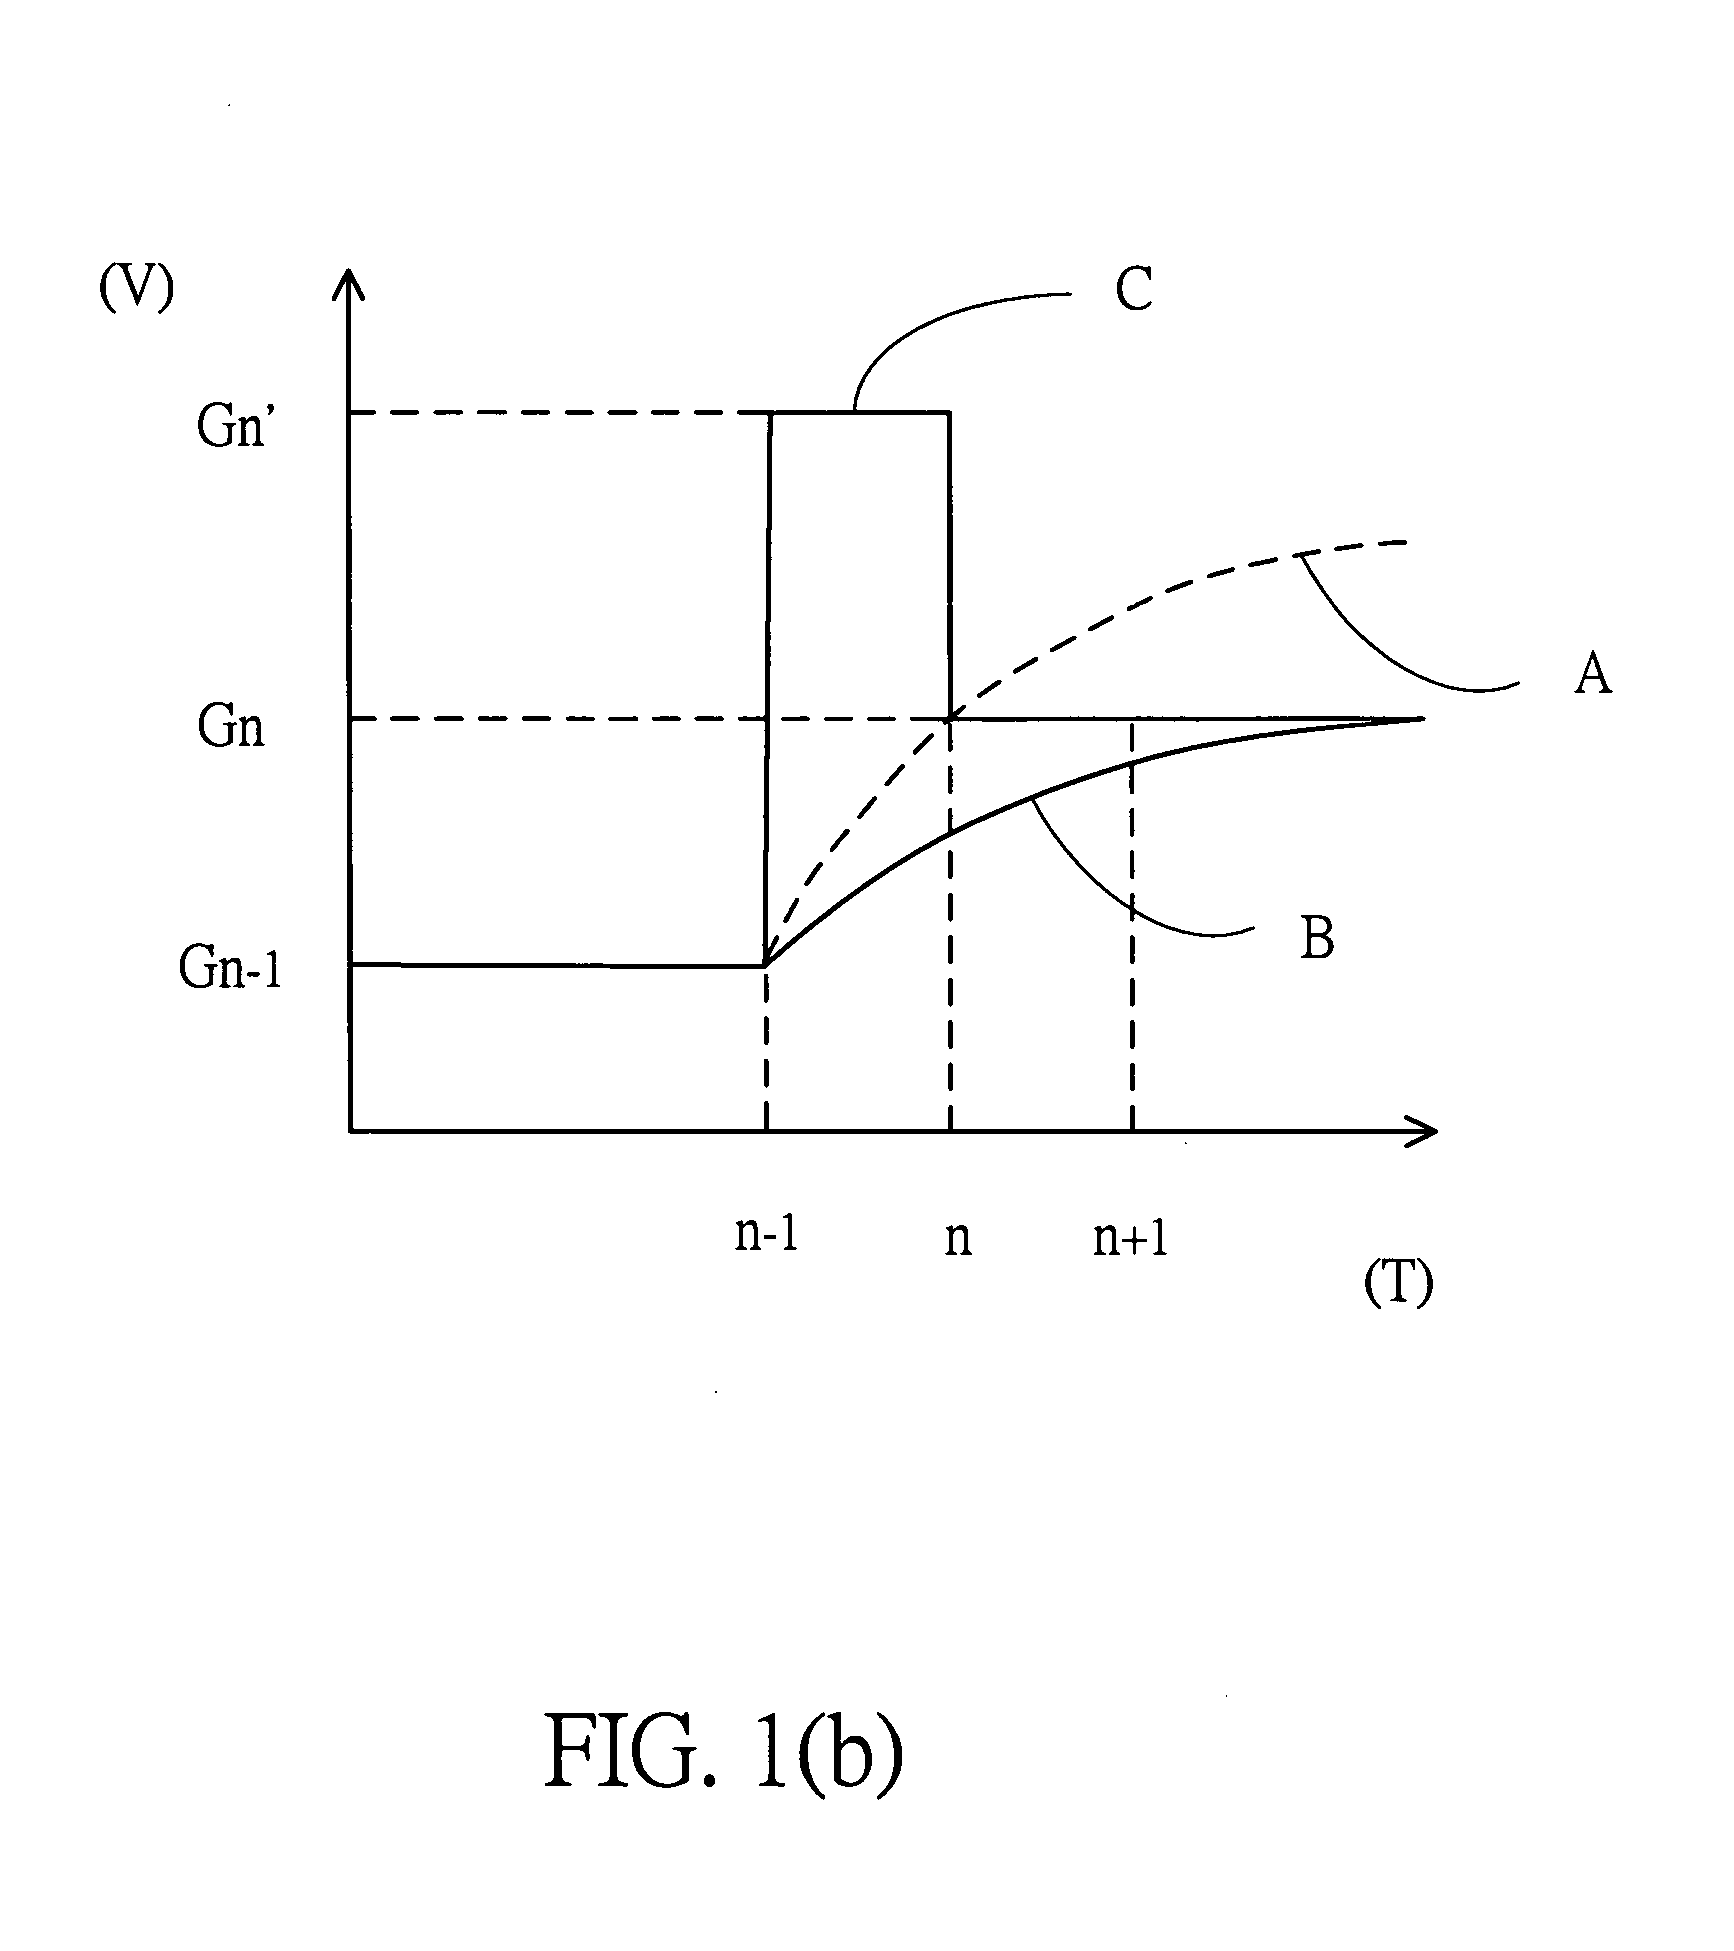 Overdrive apparatus for advancing the response time of a liquid crystal display